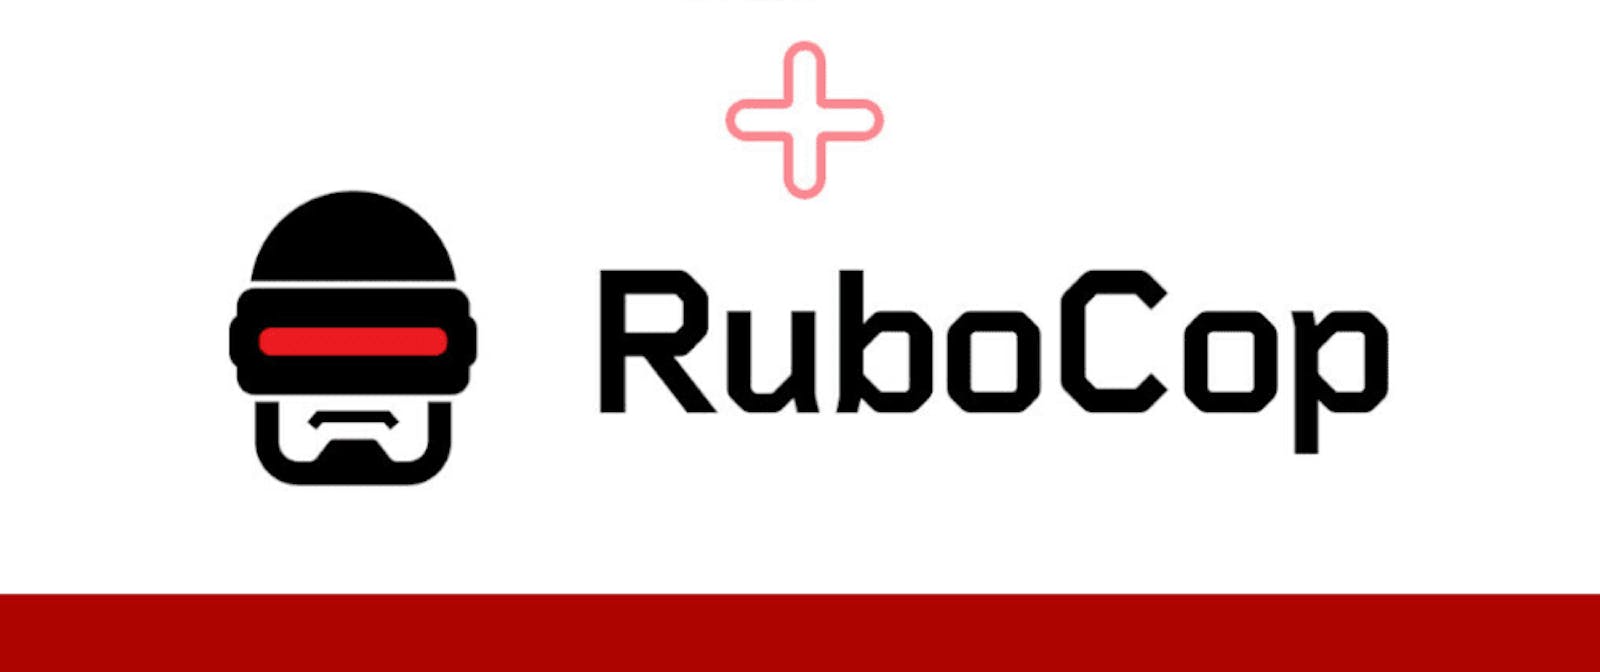 RuboCop: How to install and configure